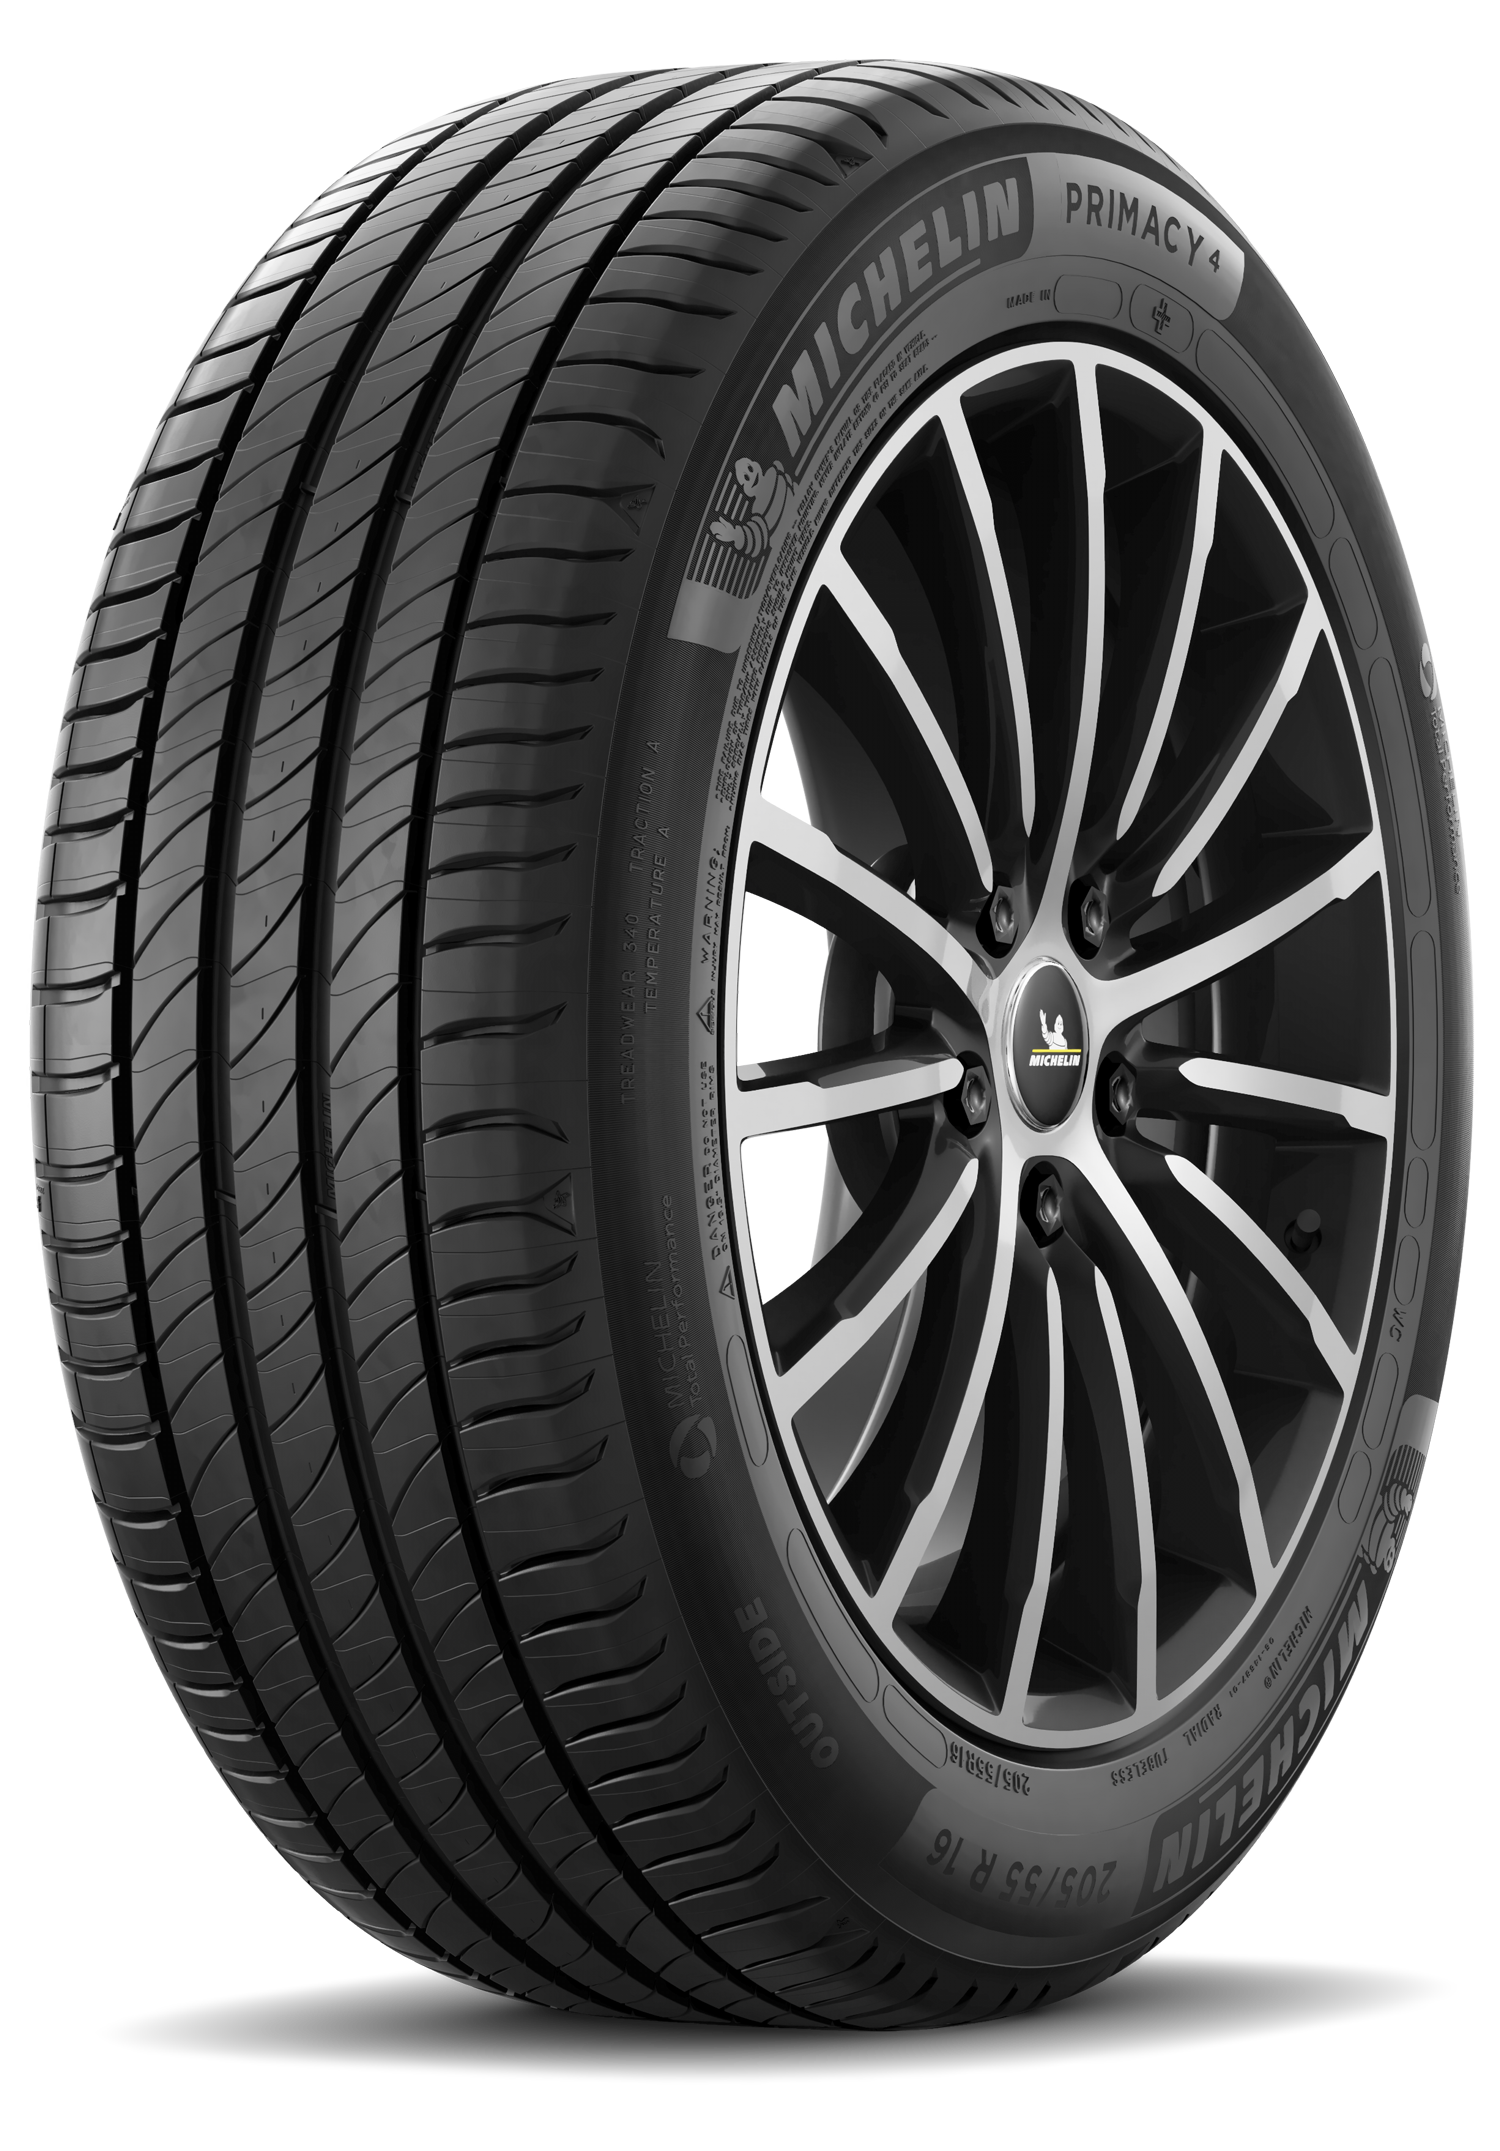 4 and Primacy - Tests Tyre Michelin Reviews Plus